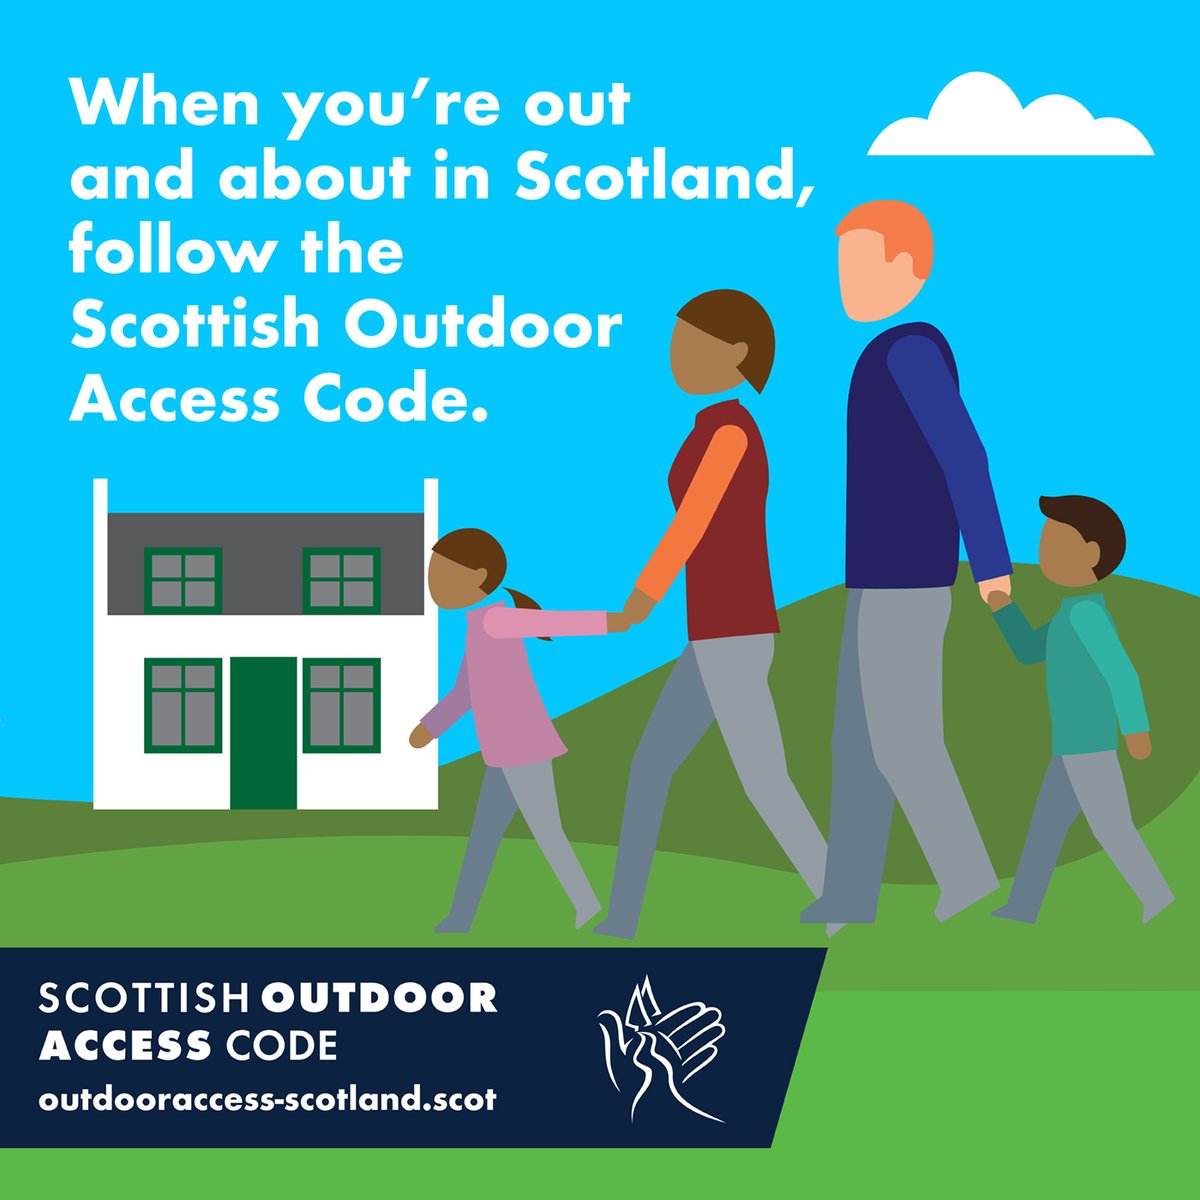 With so much space to adventure in Sutherland and Caithness, make sure you’re in the know, on how to do so responsibly. Some tips: ✅Follow the Scottish Outdoor Access Code 👣Always check the forecast and plan ahead 🥾Have the appropriate clothing and footwear @naturescot